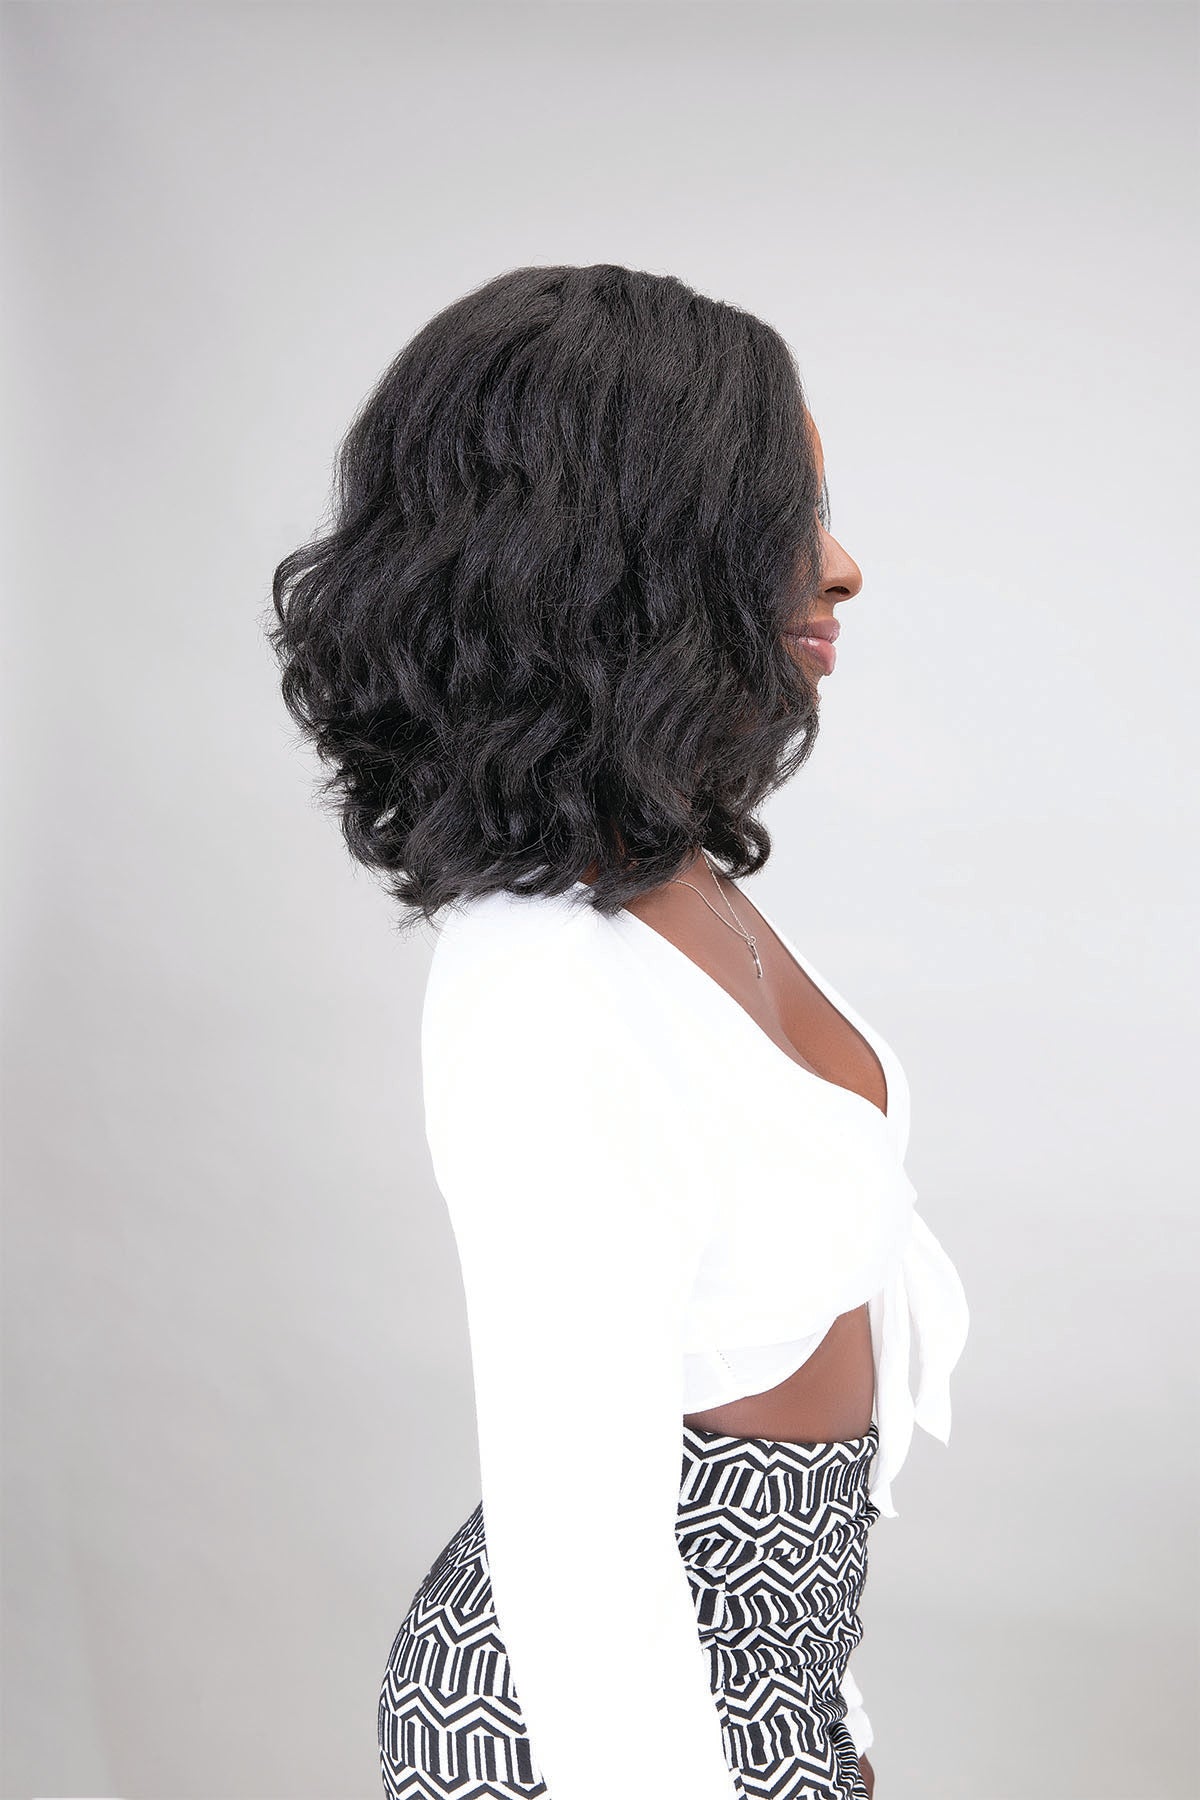 JANET COLLECTIONS - NATURAL ME LACE JODE WIG